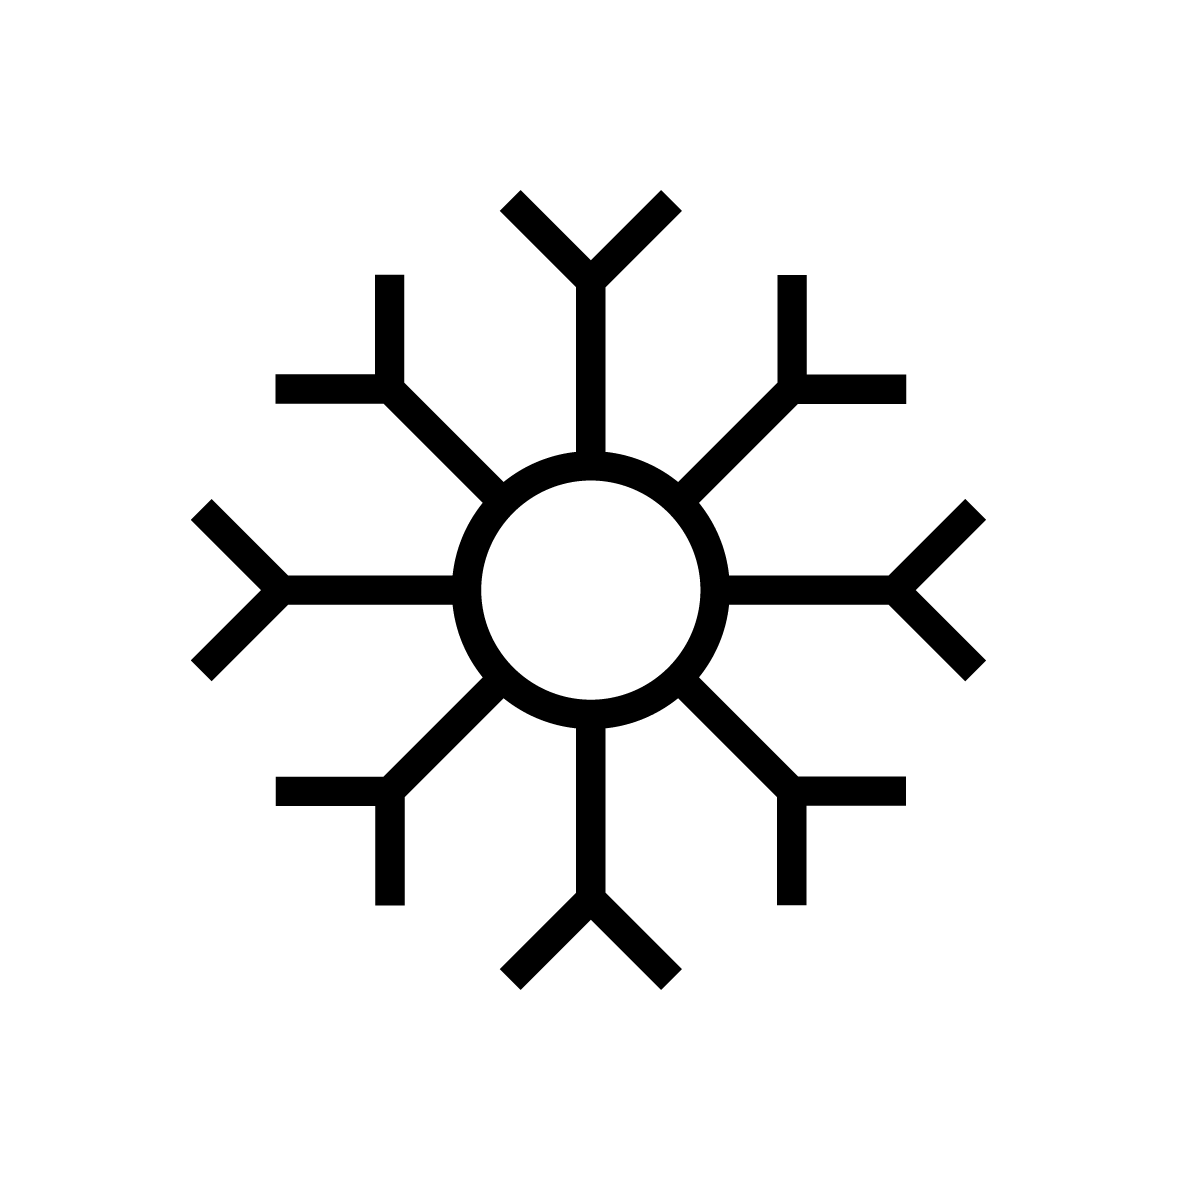 https://solidus.com/wp-content/uploads/2023/02/Solidus_icon_white_USP_fast-freezing.png